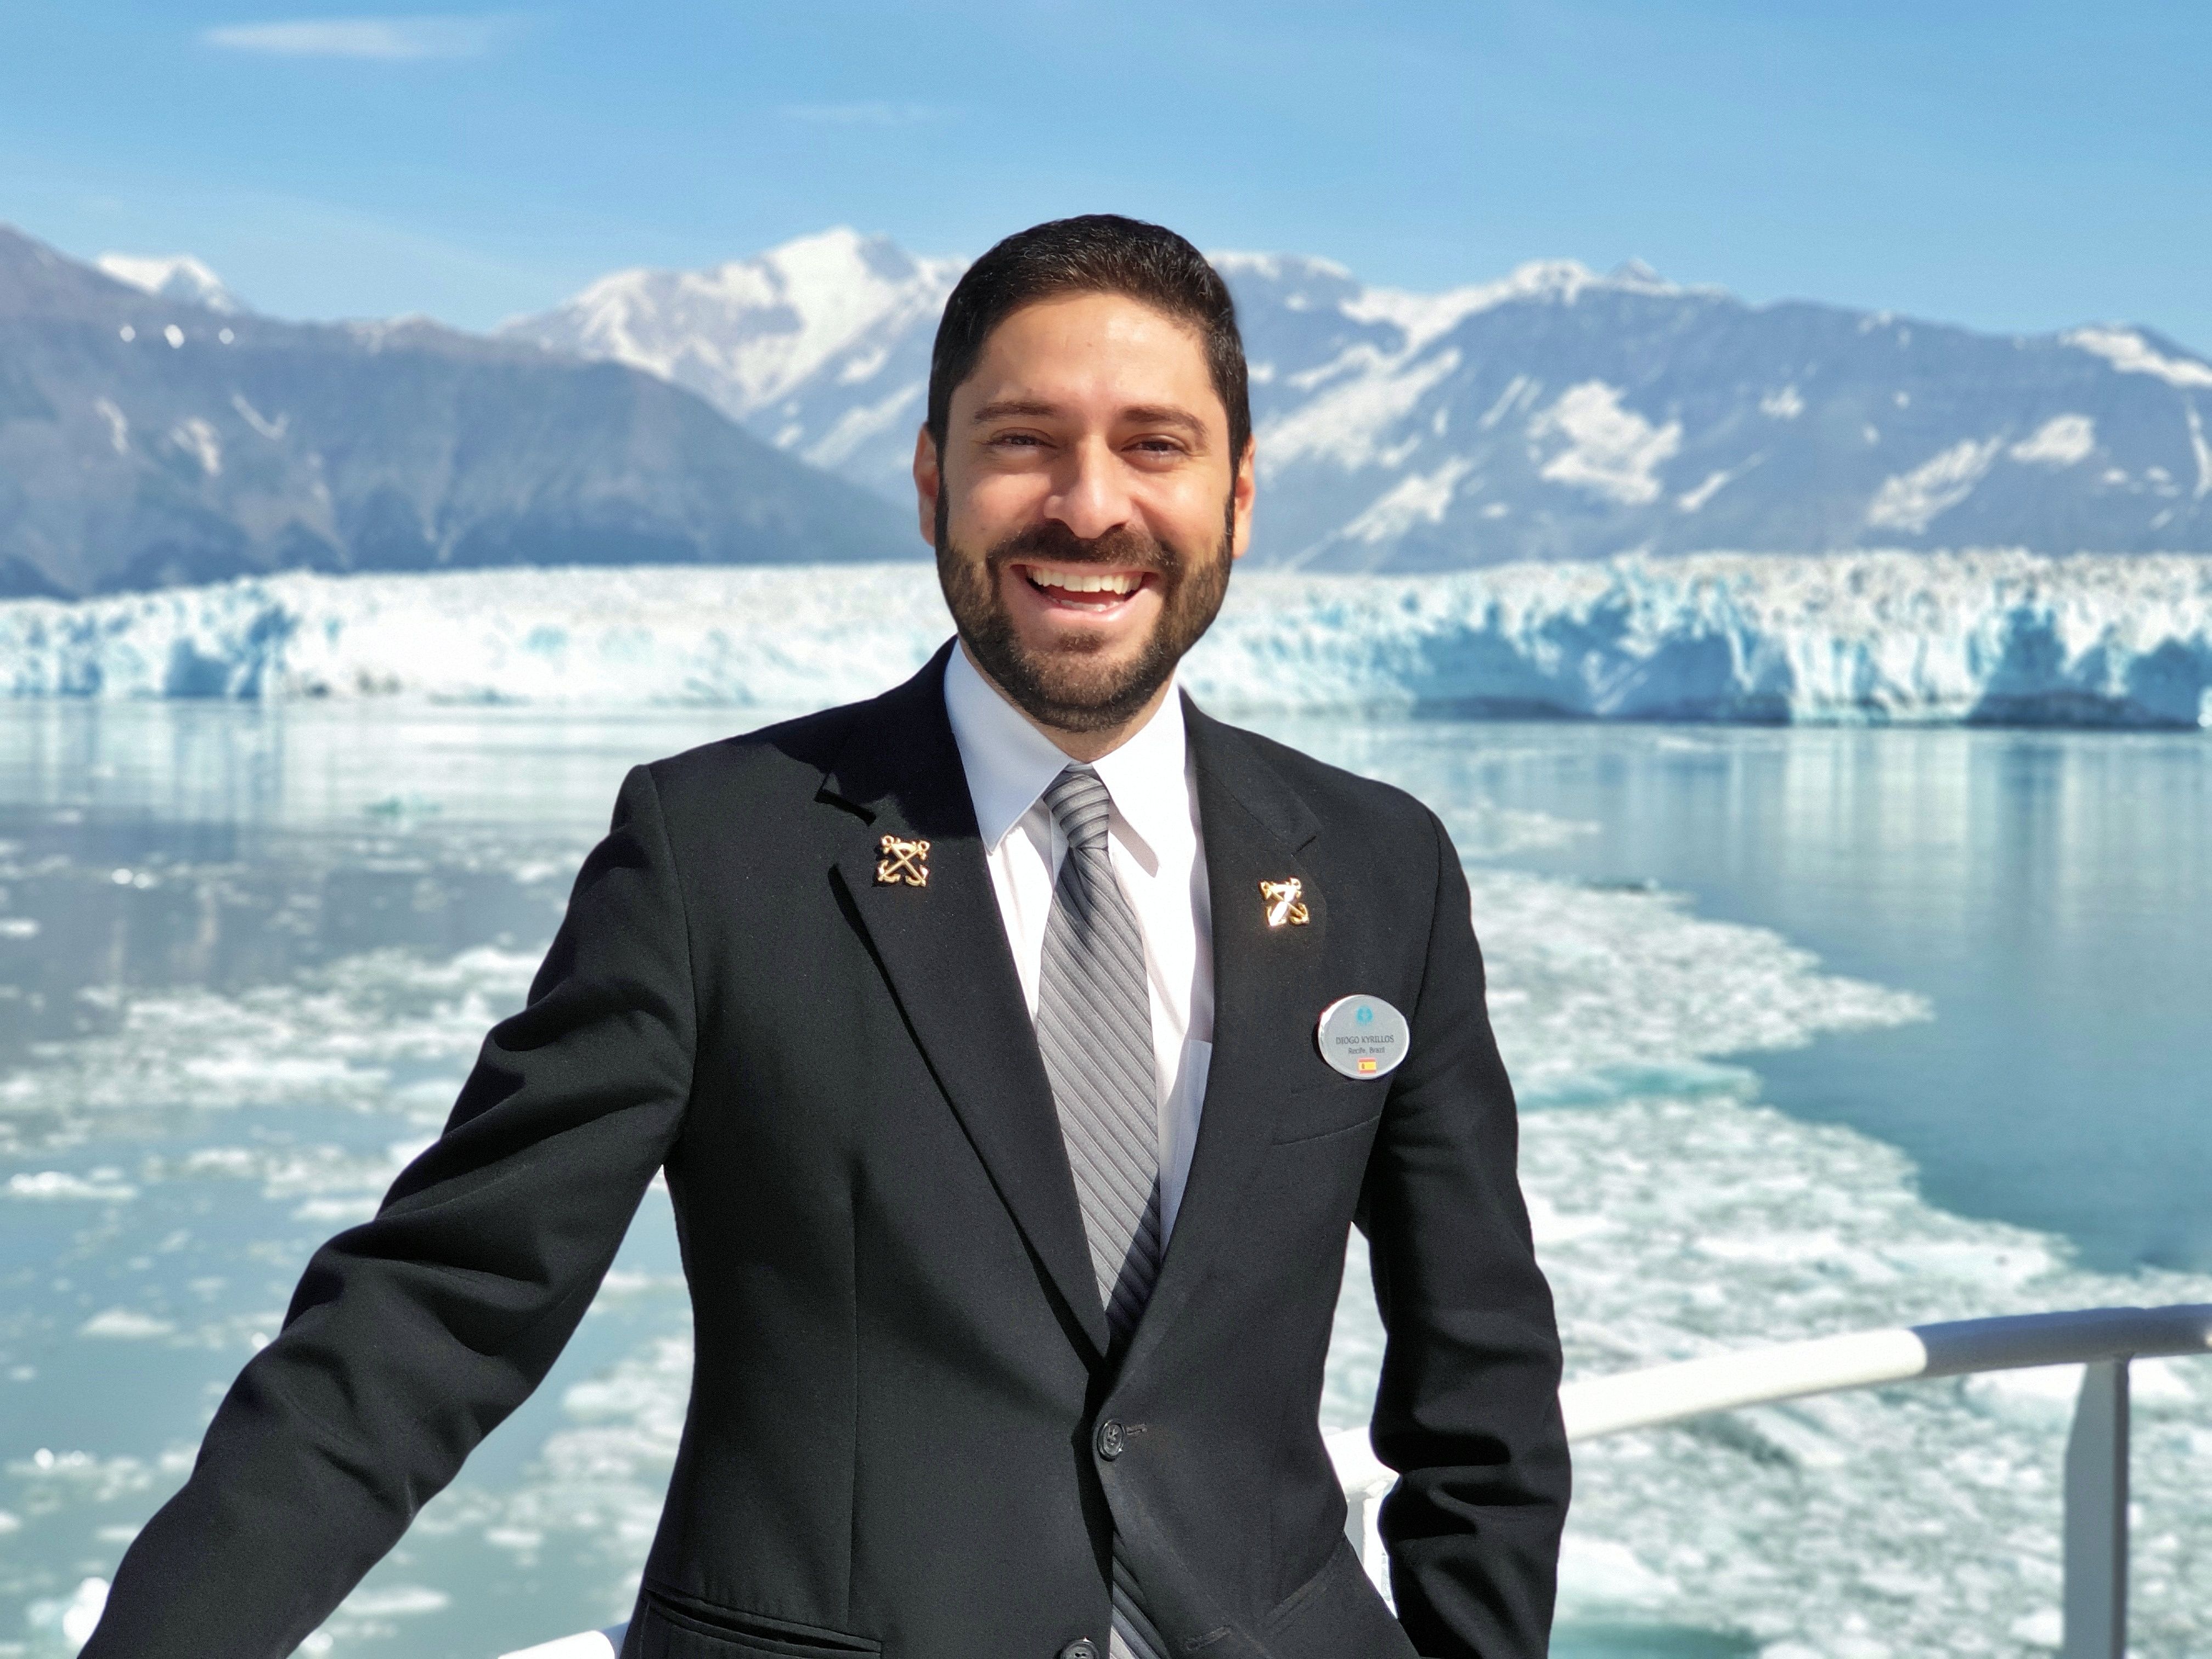 Diogo onboard Crystal Symphony in 2018 in Alsaka, one of his favorite destinations